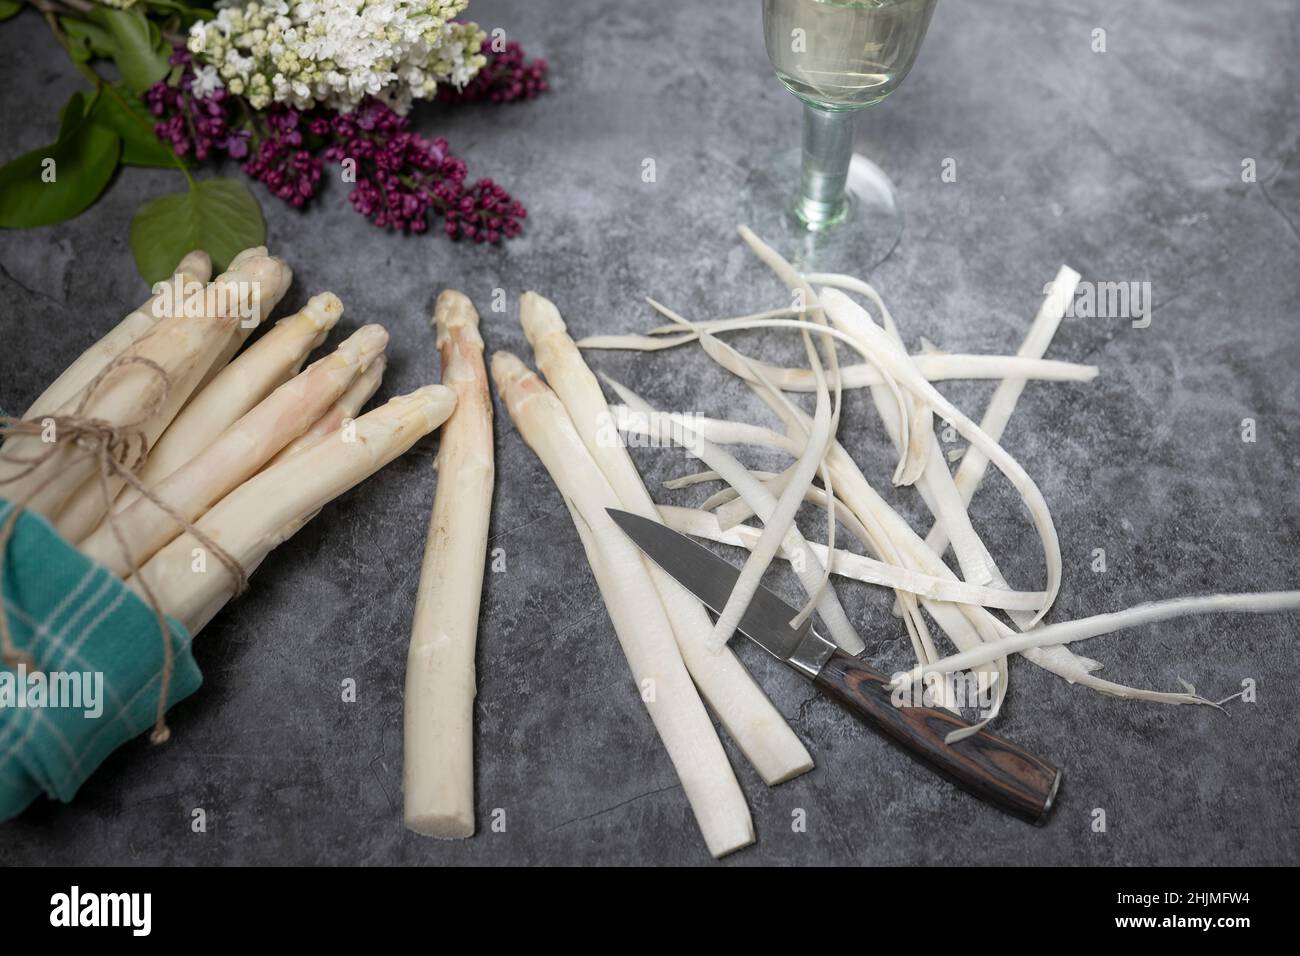 White asparagus is peeled with a knife  Stock Photo